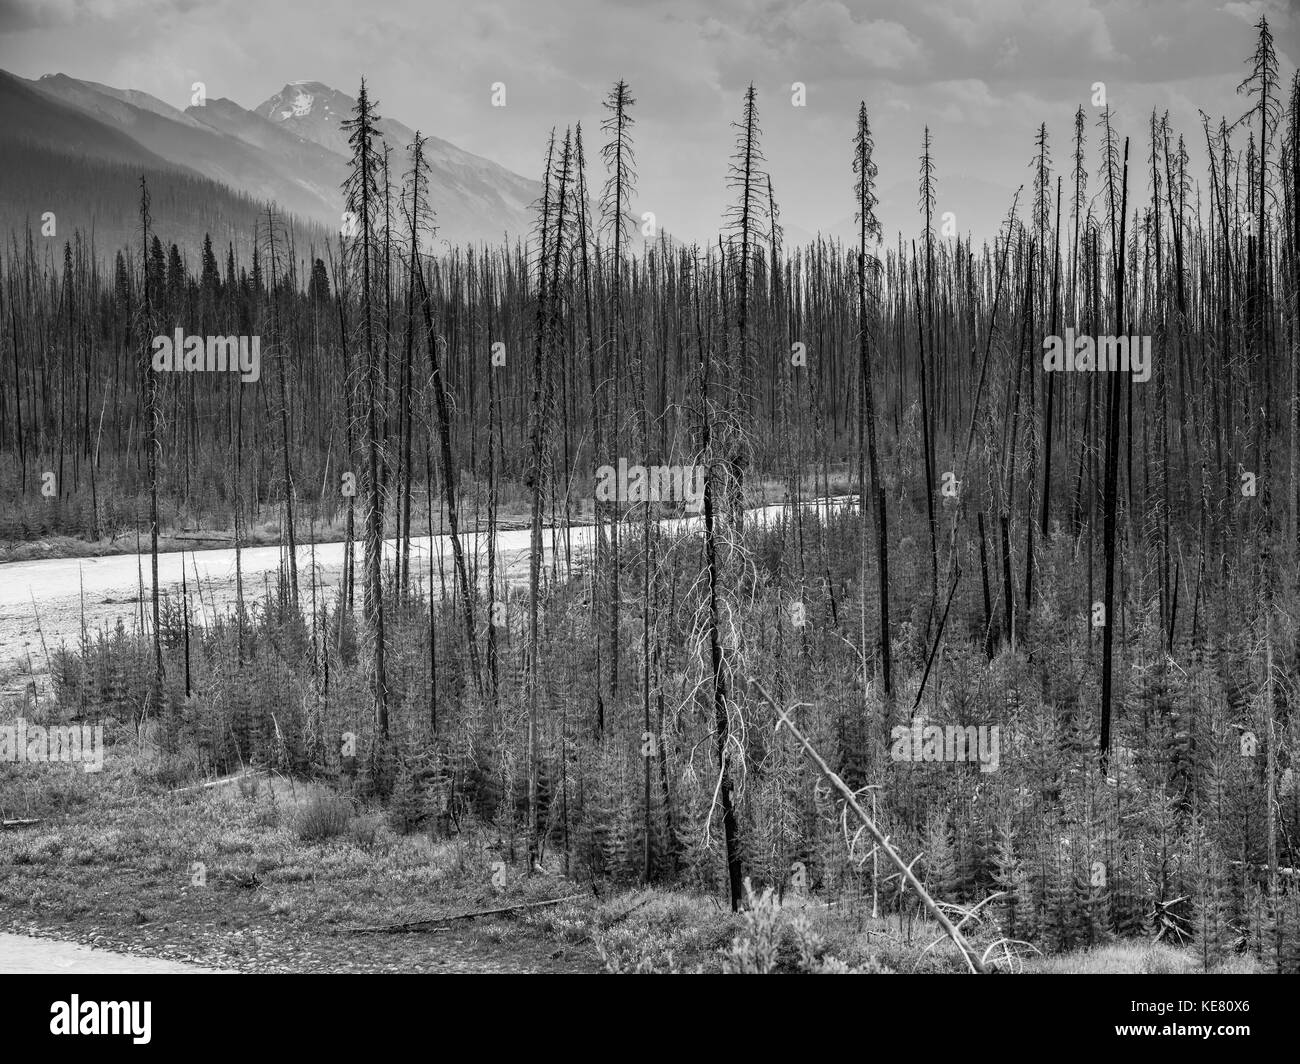 Black and white image of leafless, dead trees and new growth of a forest emerging in the mountains; Edgewater, British Columbia, Canada Stock Photo